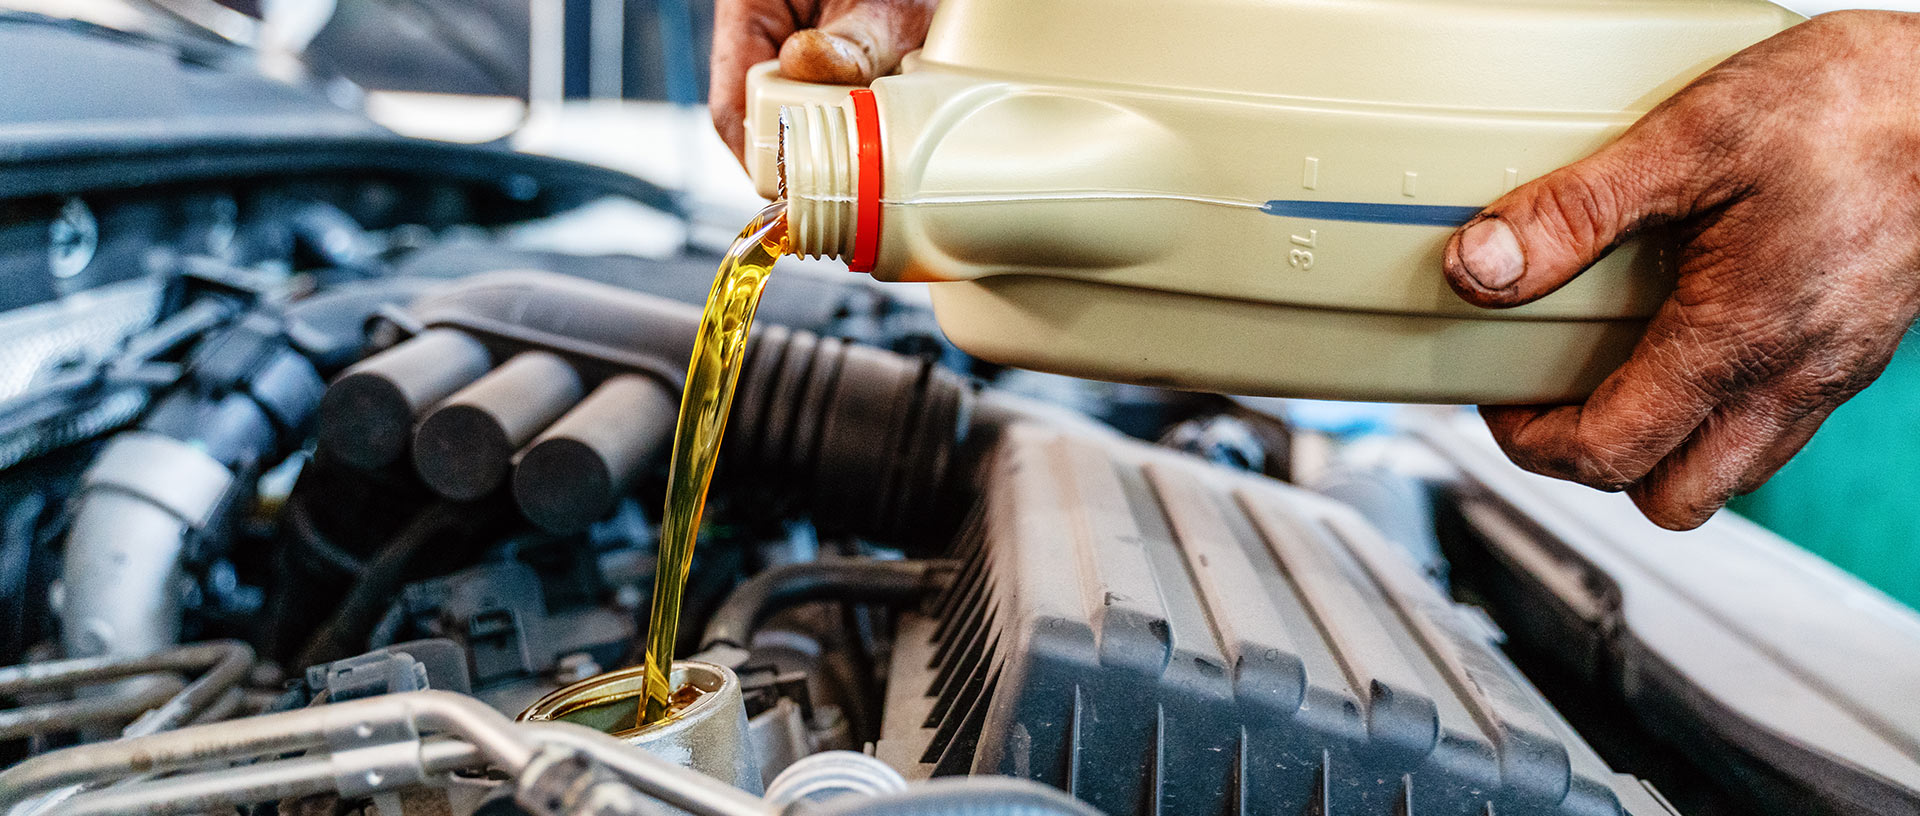 Oil Changes Services in Mascoutah, IL